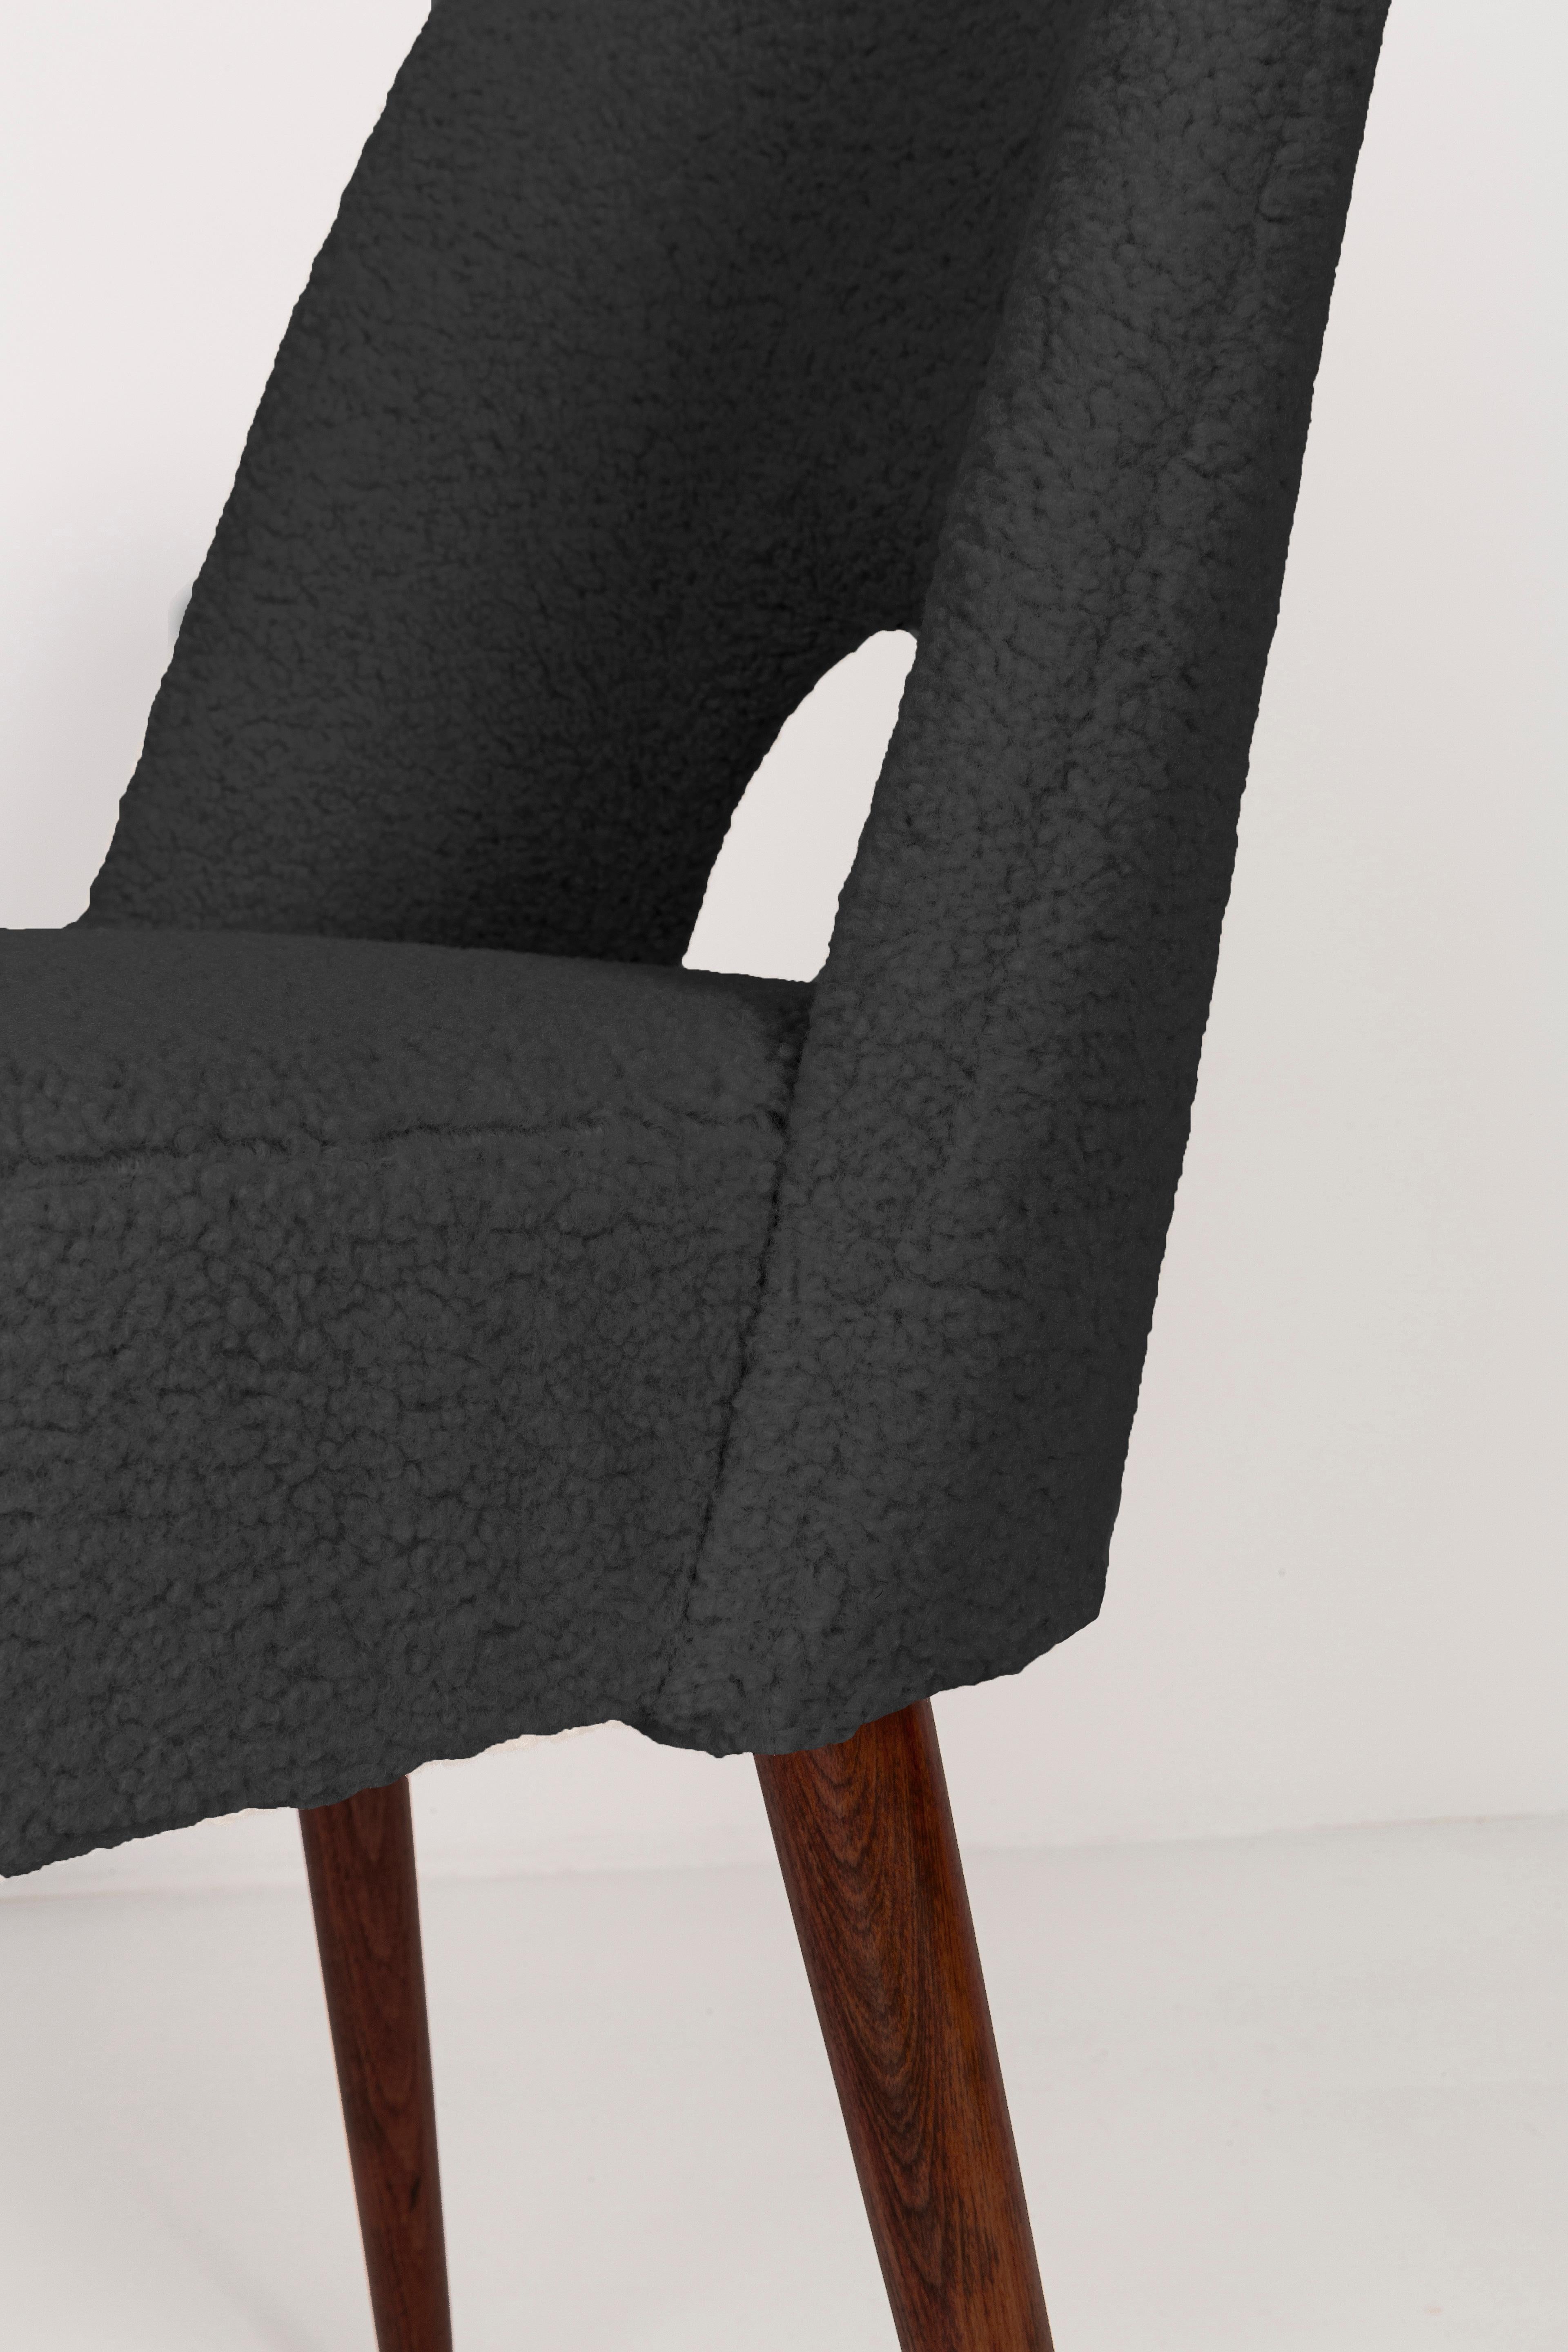 Set of Ten Dark Gray Boucle 'Shell' Chairs, 1960s For Sale 1